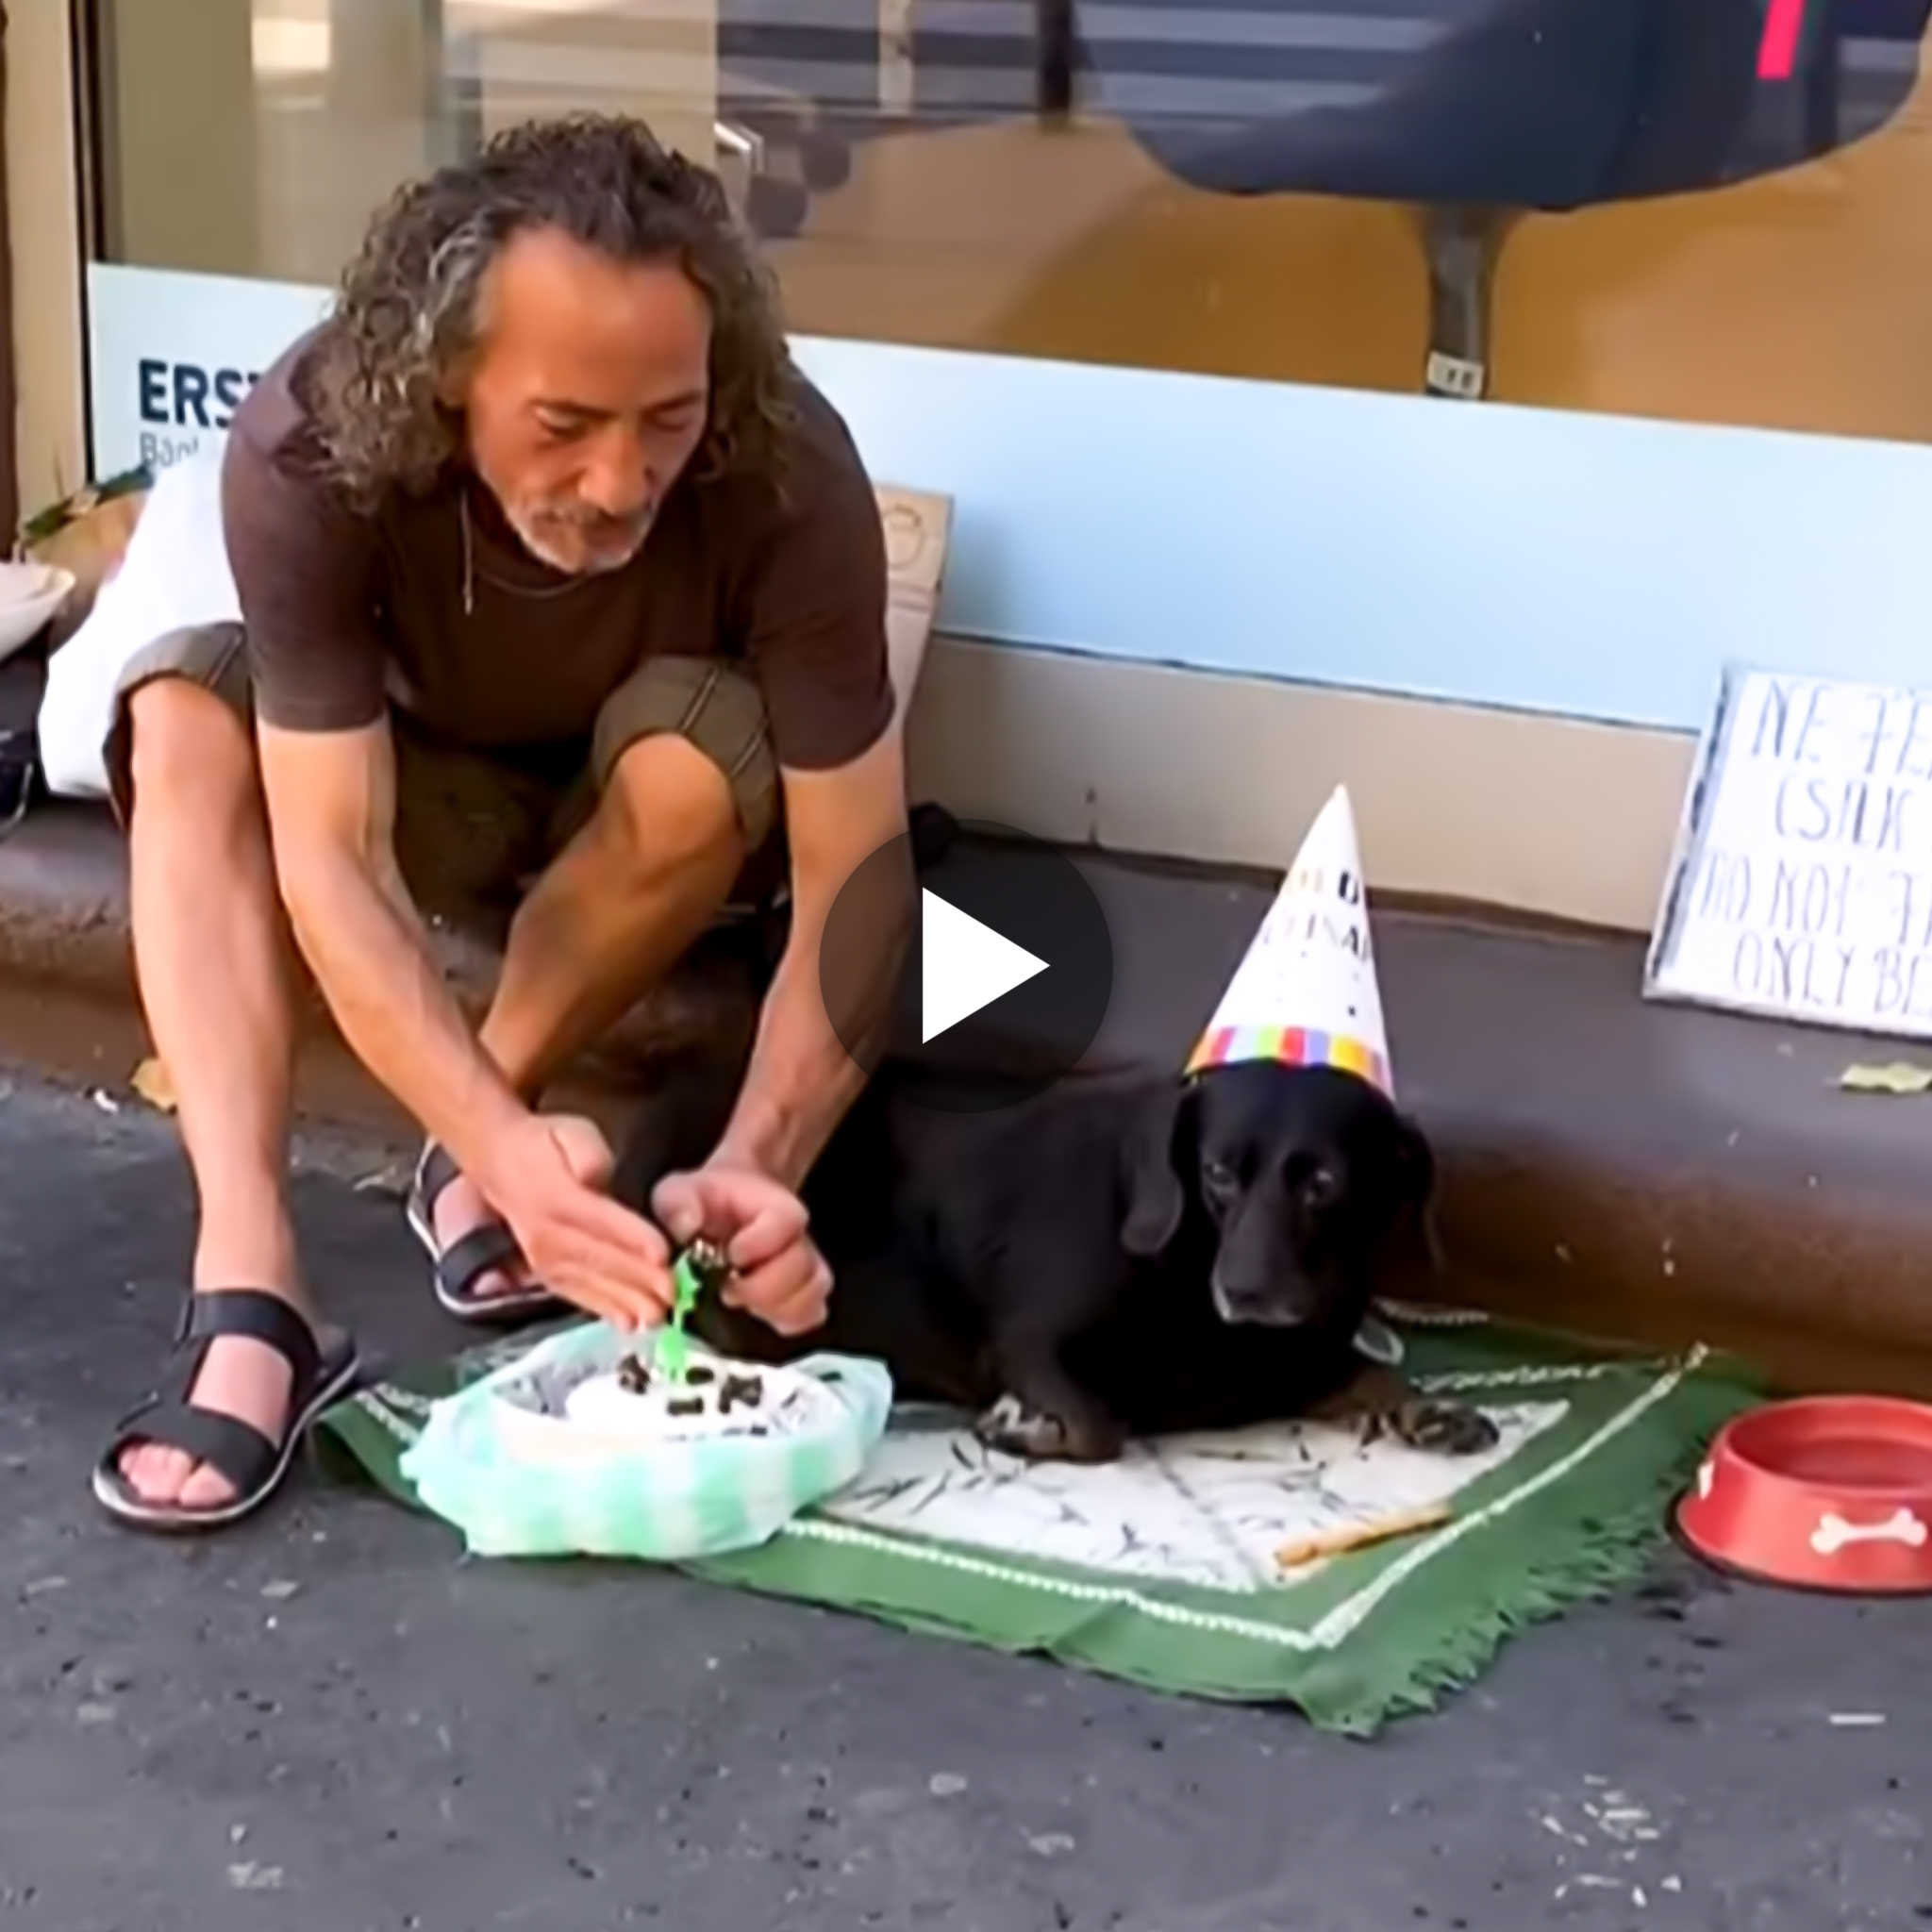 A homeless owner shows his four-legged friend that he cares for him unconditionally despite his lack of resources by remembering his birthday.